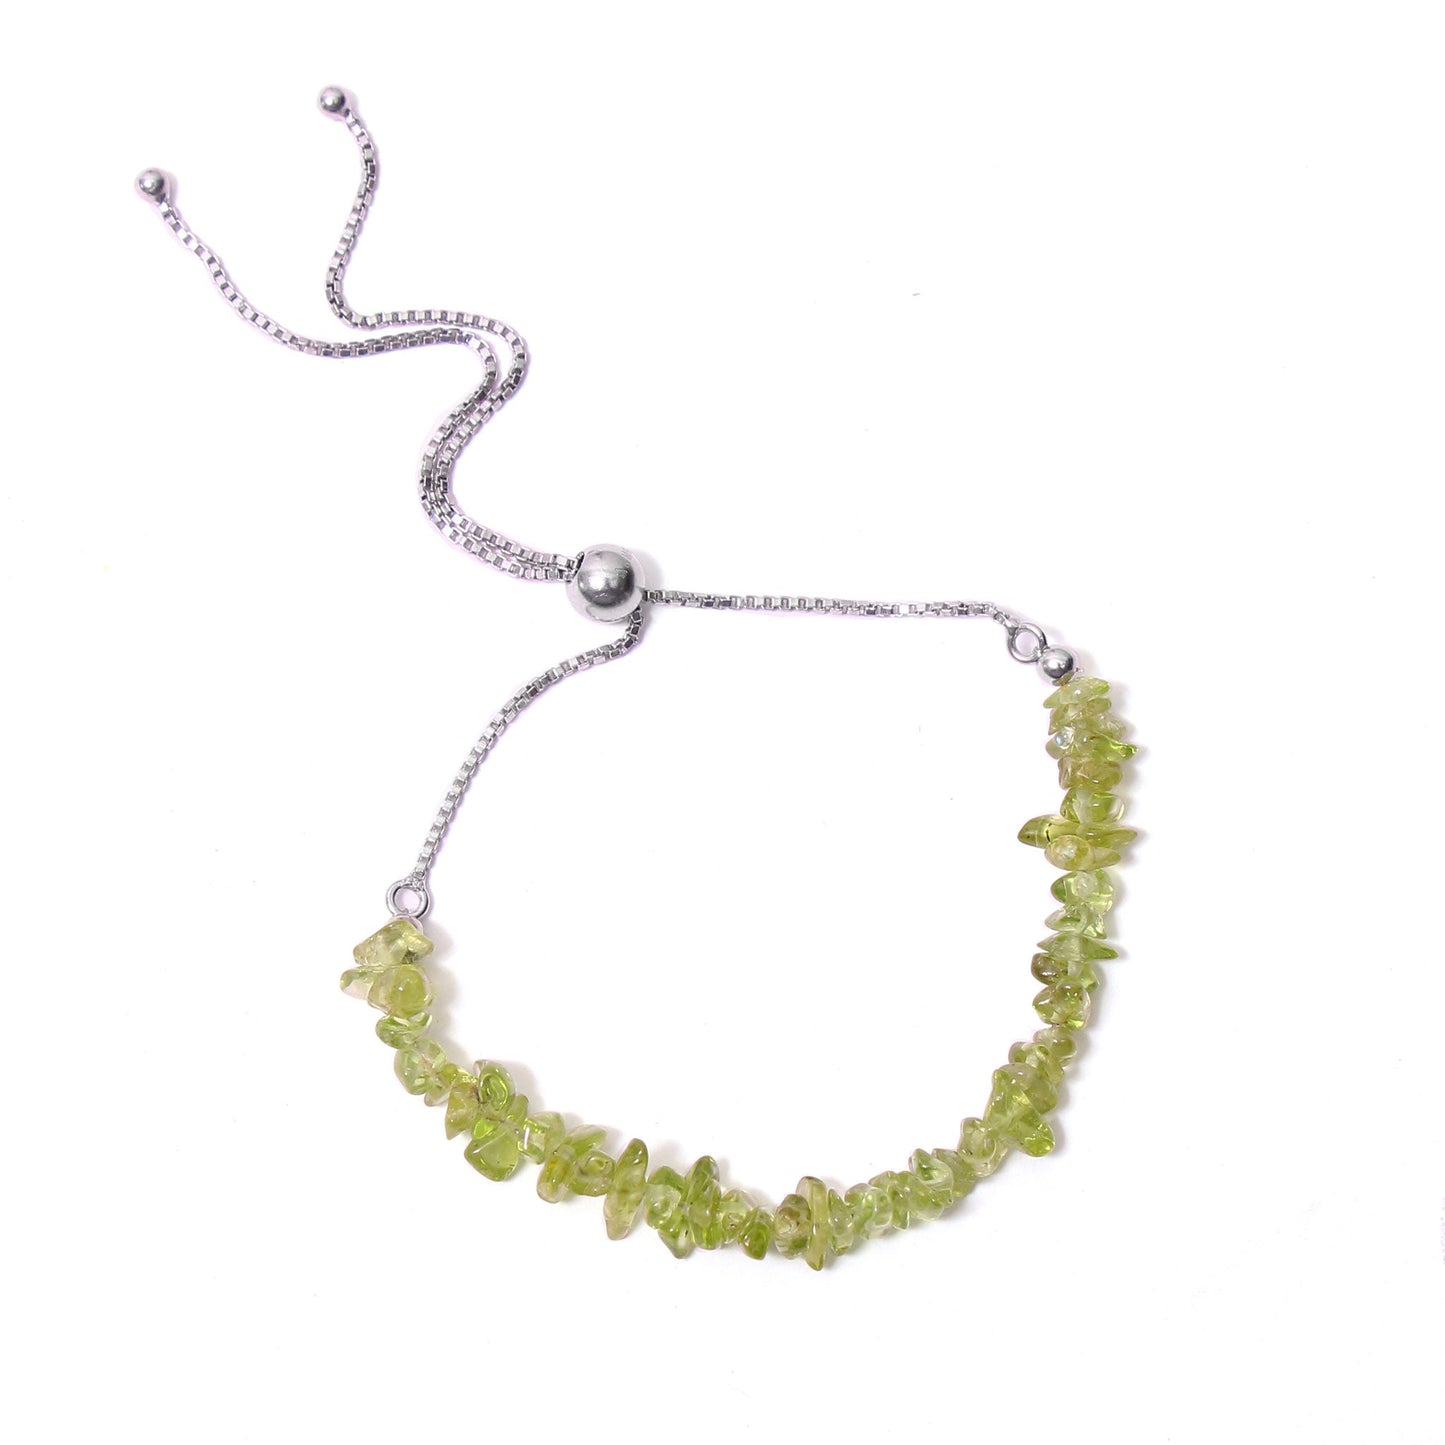 Green Peridot Sterling Silver Bolo Chain Bracelet | Mesmerizing Jewelry For Her GemsRush